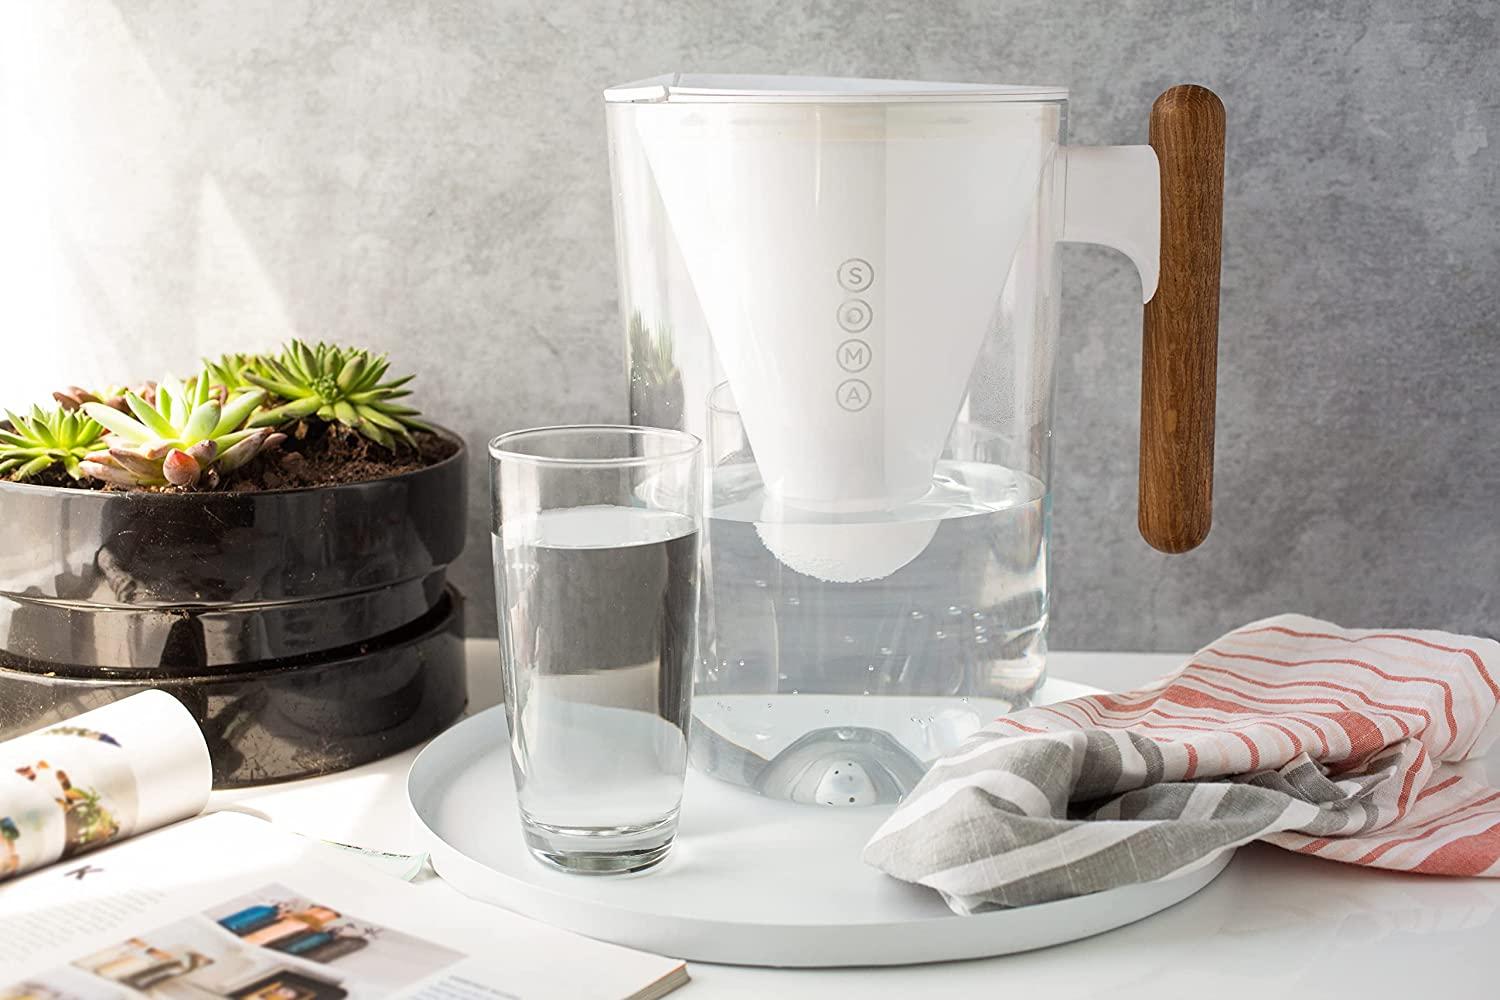 10-Cup Water Filter Pitcher